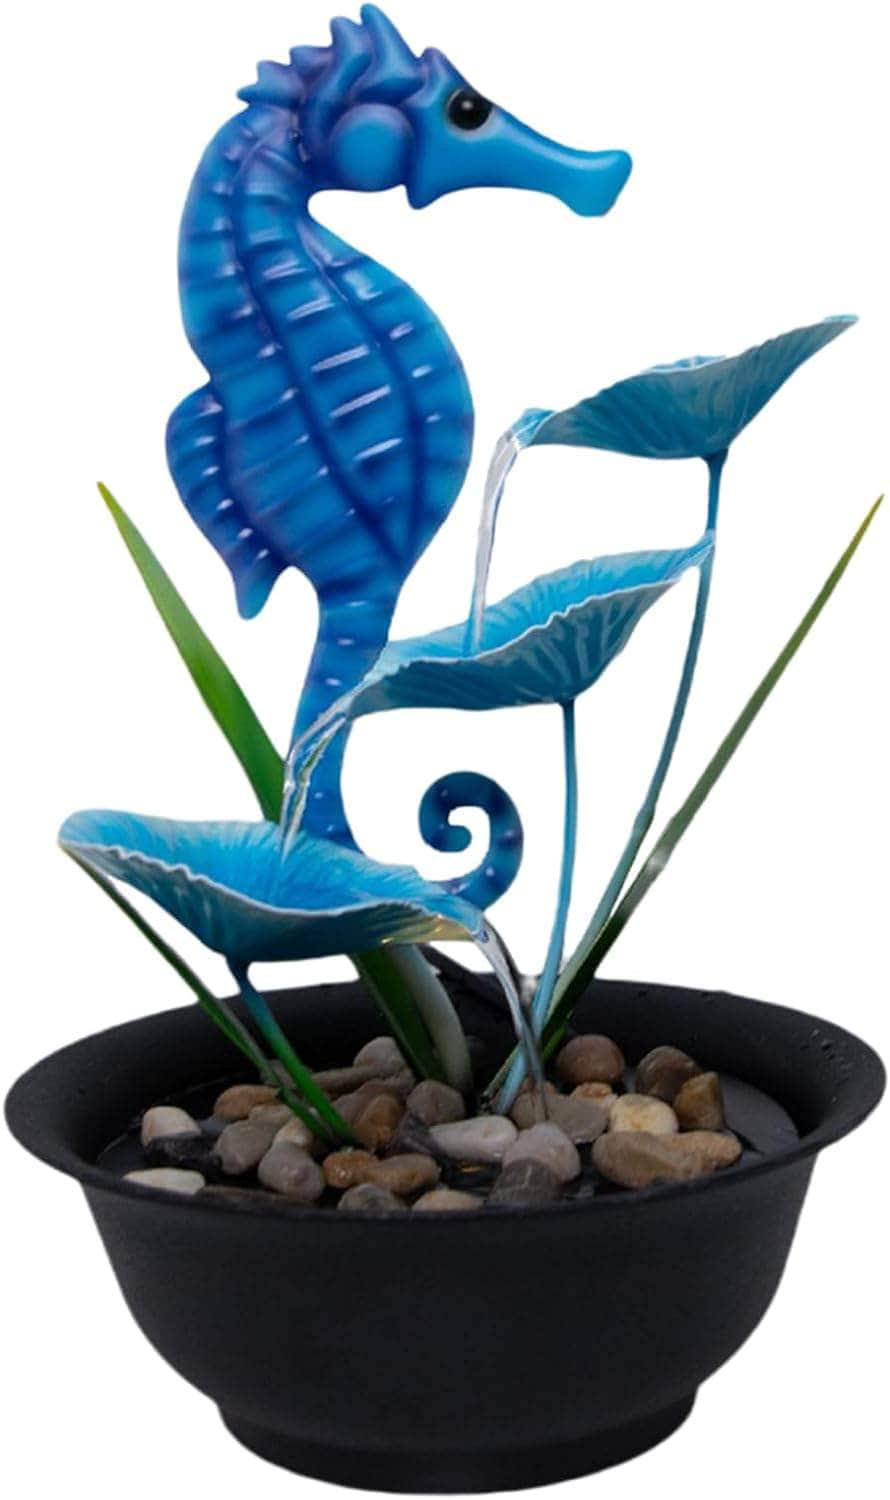 Ferrisland Tabletop Fountain Indoor with LED Lights, Sea Horse 13" H 3-Tier Water Fountain Includes Pump and Rocks, Metal Lightweight Compact Desktop Fountain & Decoration for Home Bedroom Office Ferrisland